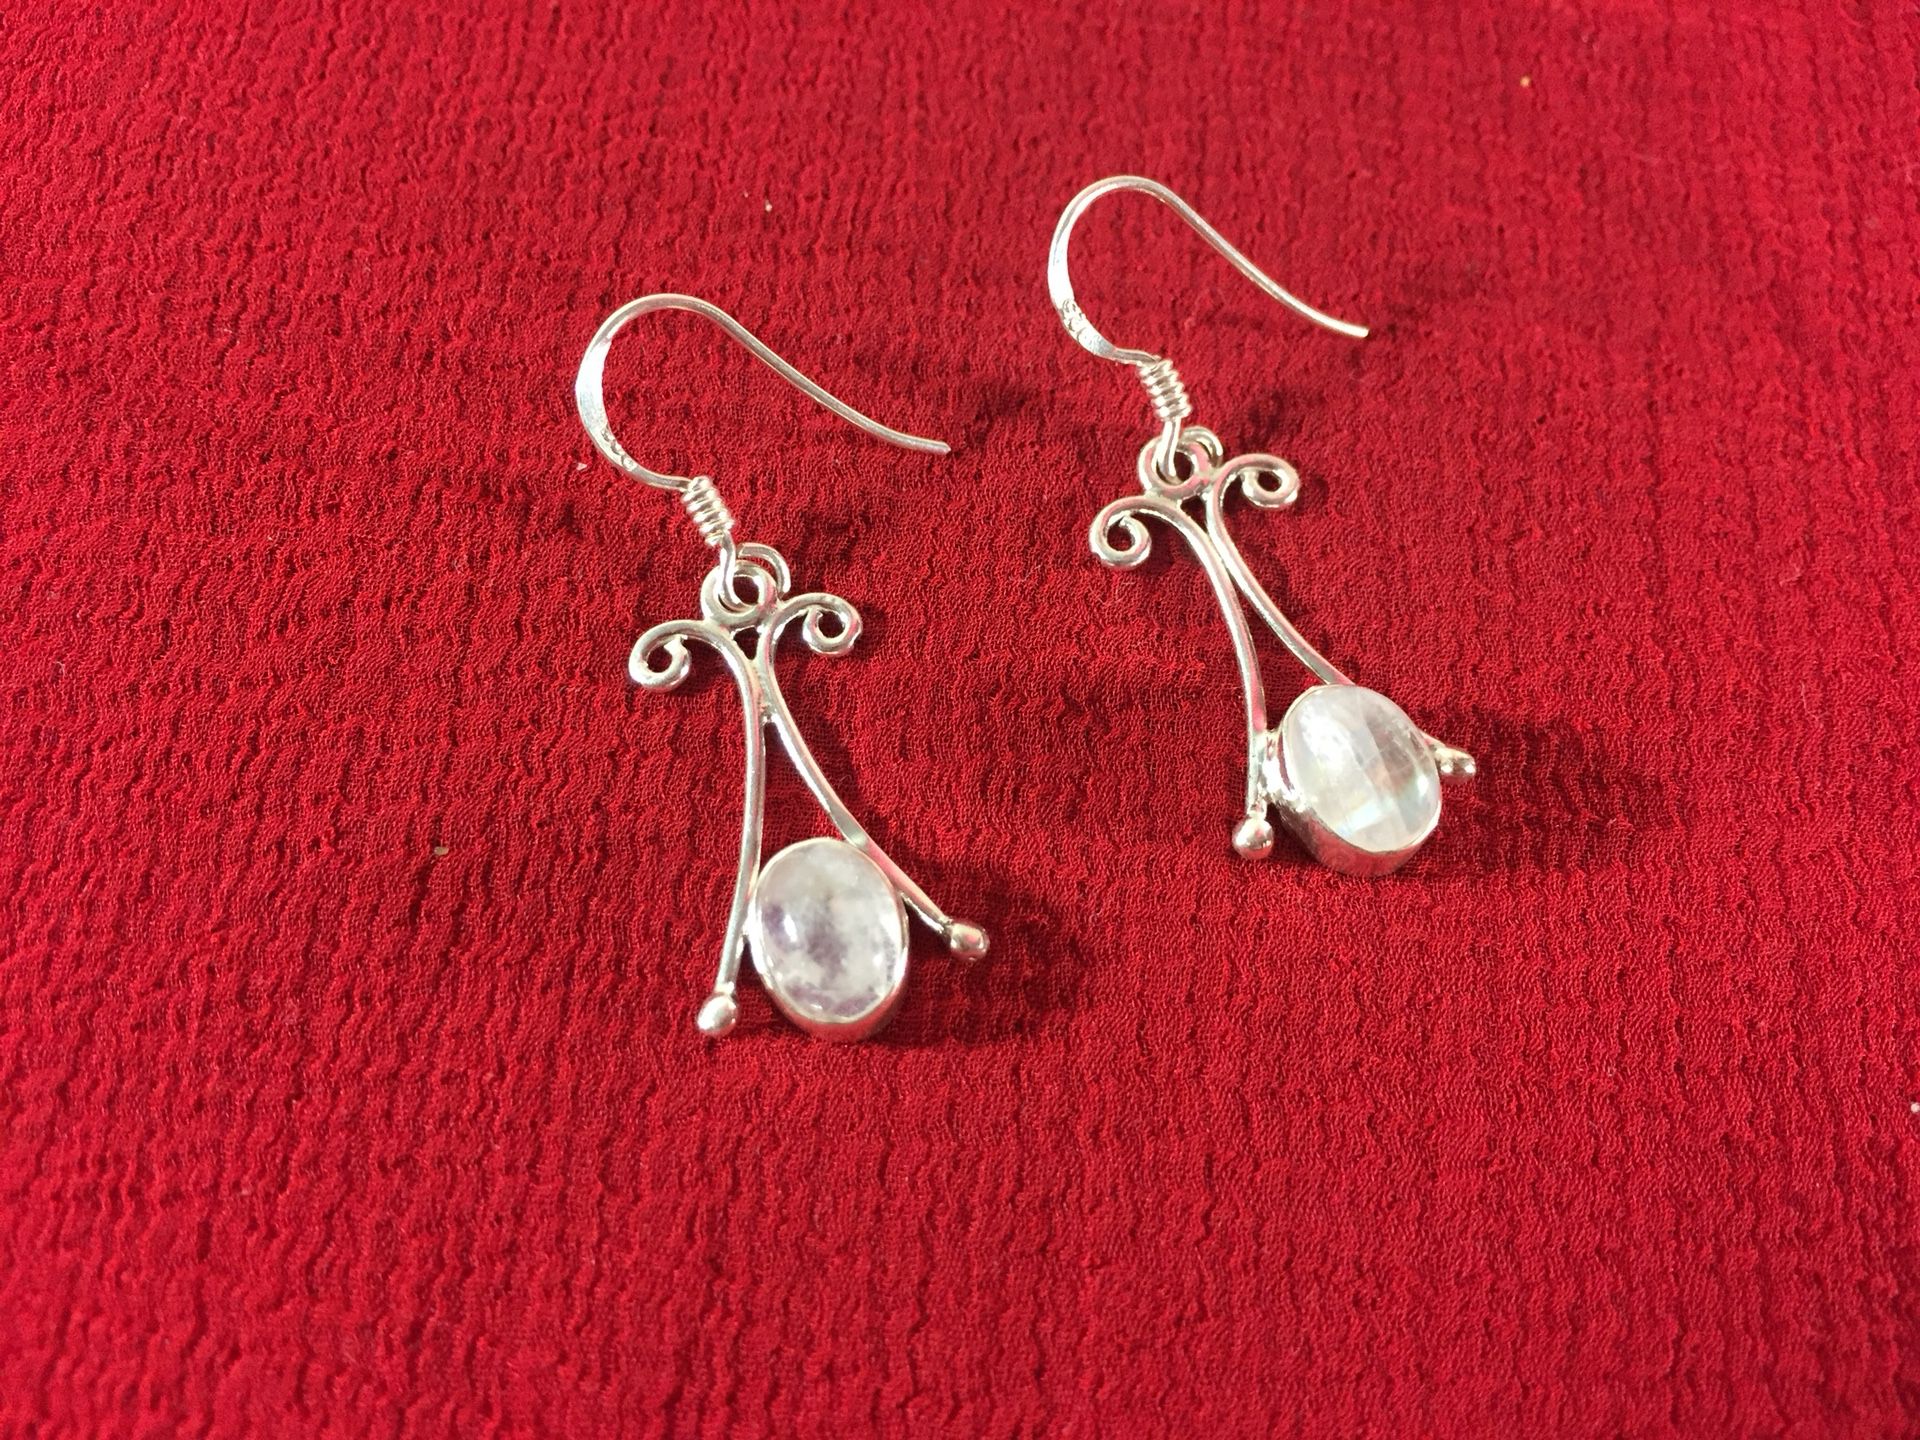 Handcrafted 925 Stamped Silver Earrings with moonstone